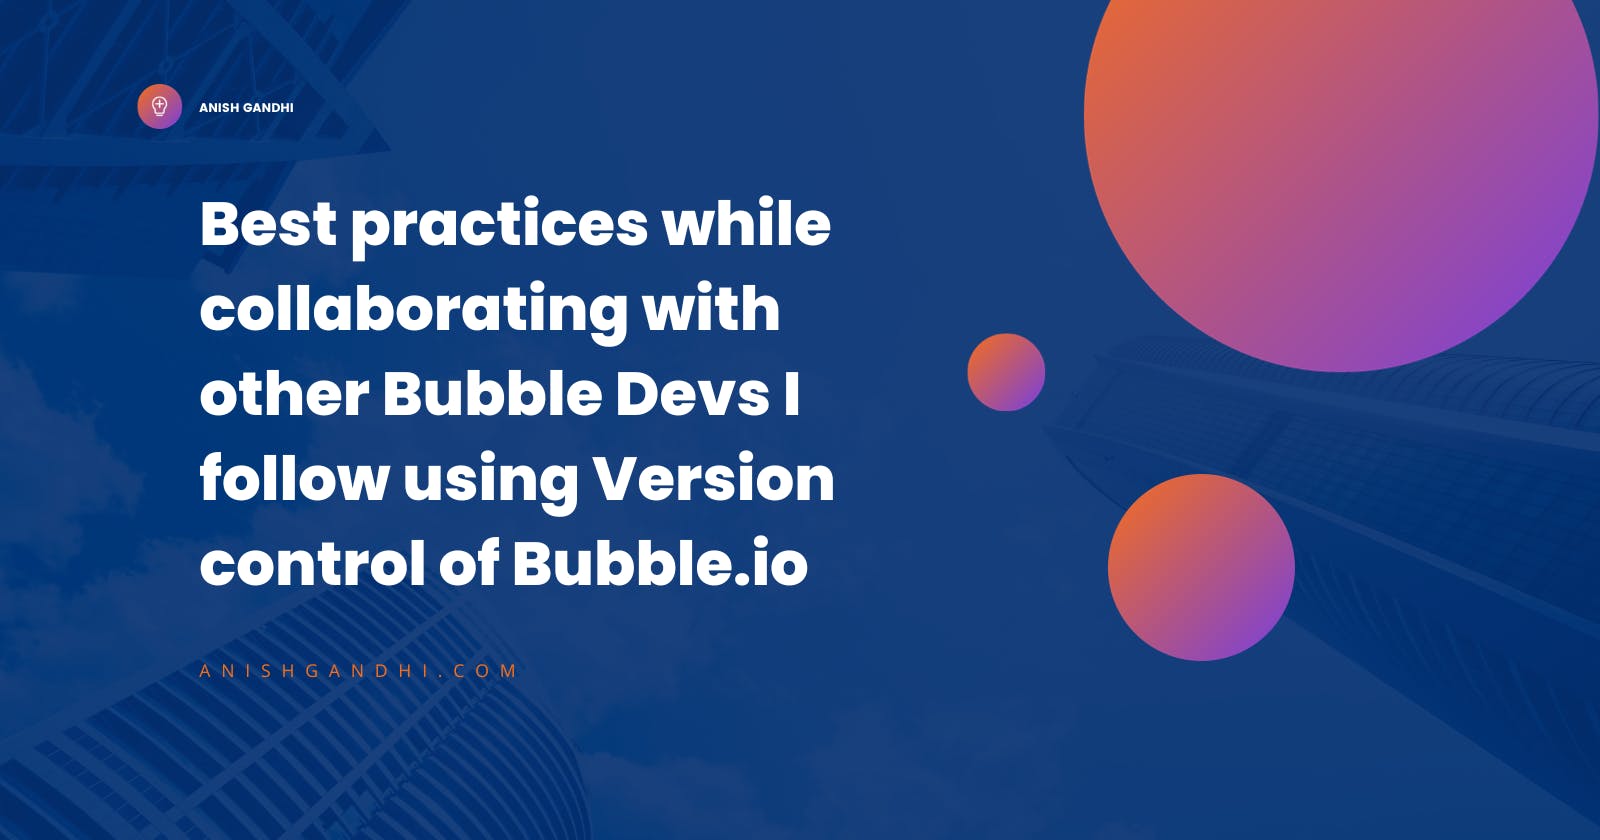 Best practices while collaborating with other Bubble Devs I follow using Version control of Bubble.io